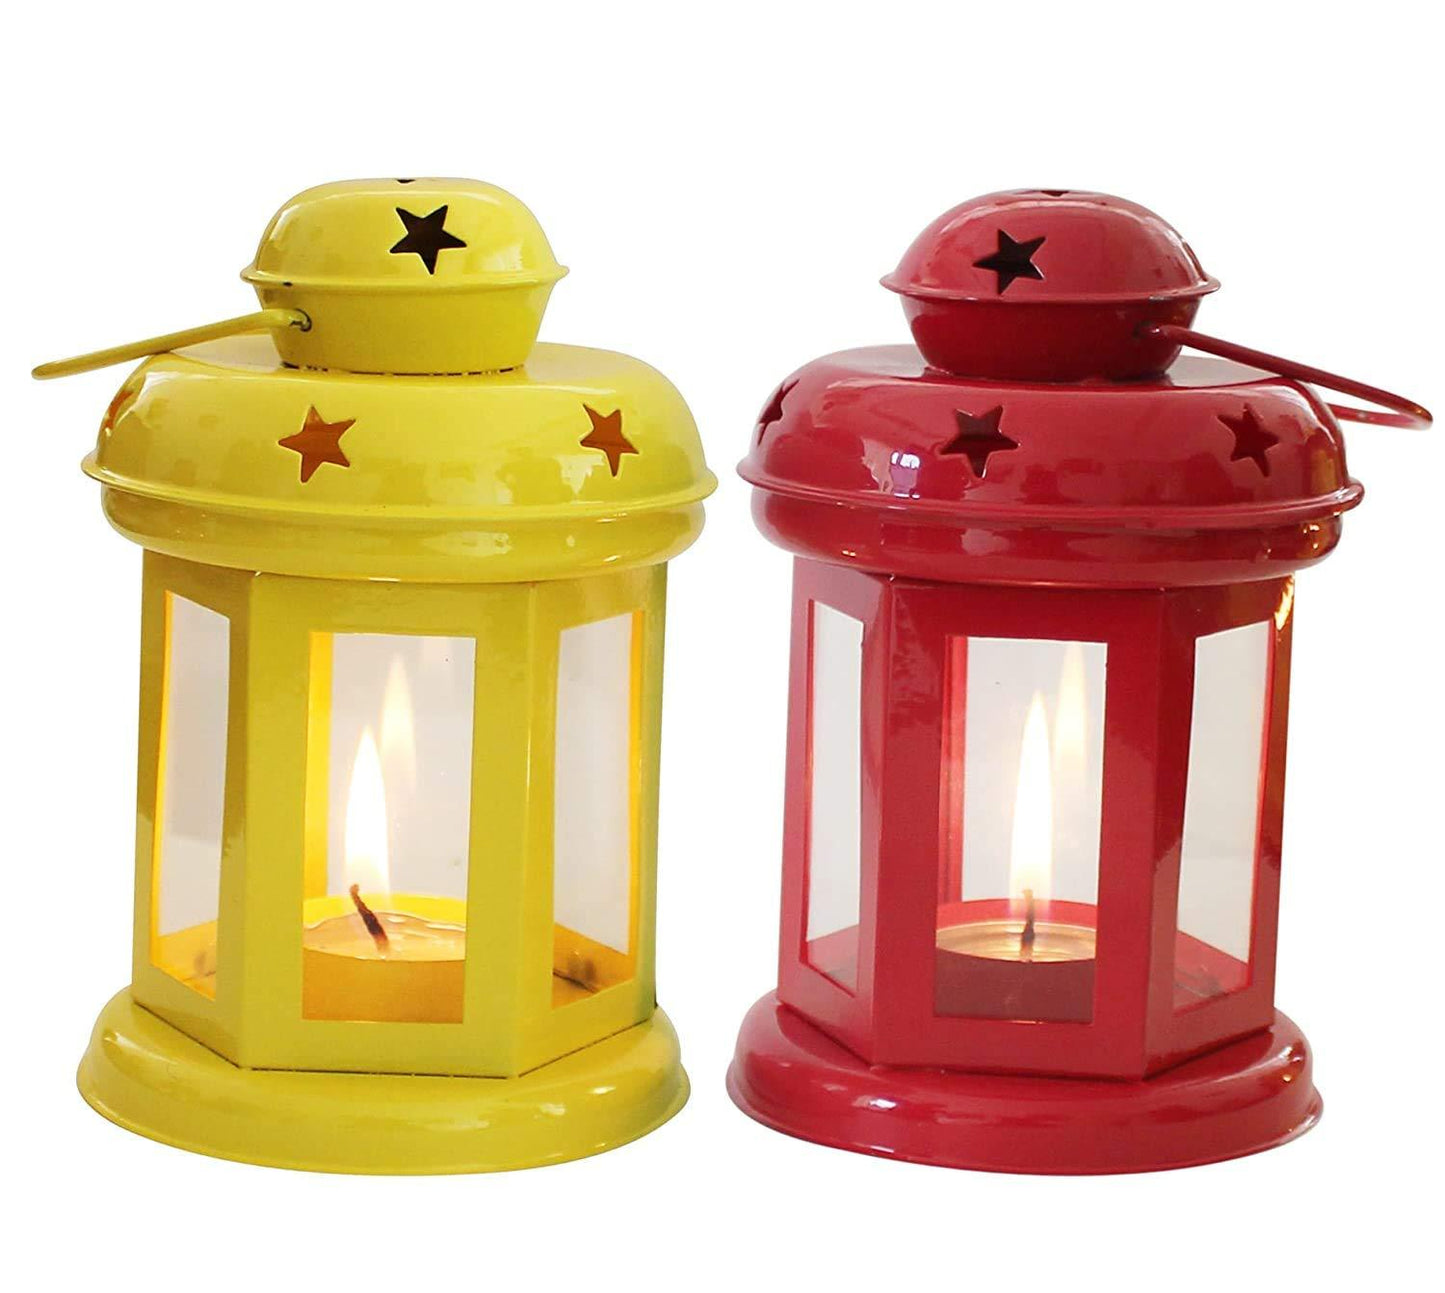 Diwali best selling item set of 4 home decor laltern lamp with candle light holders - GreentouchCrafts